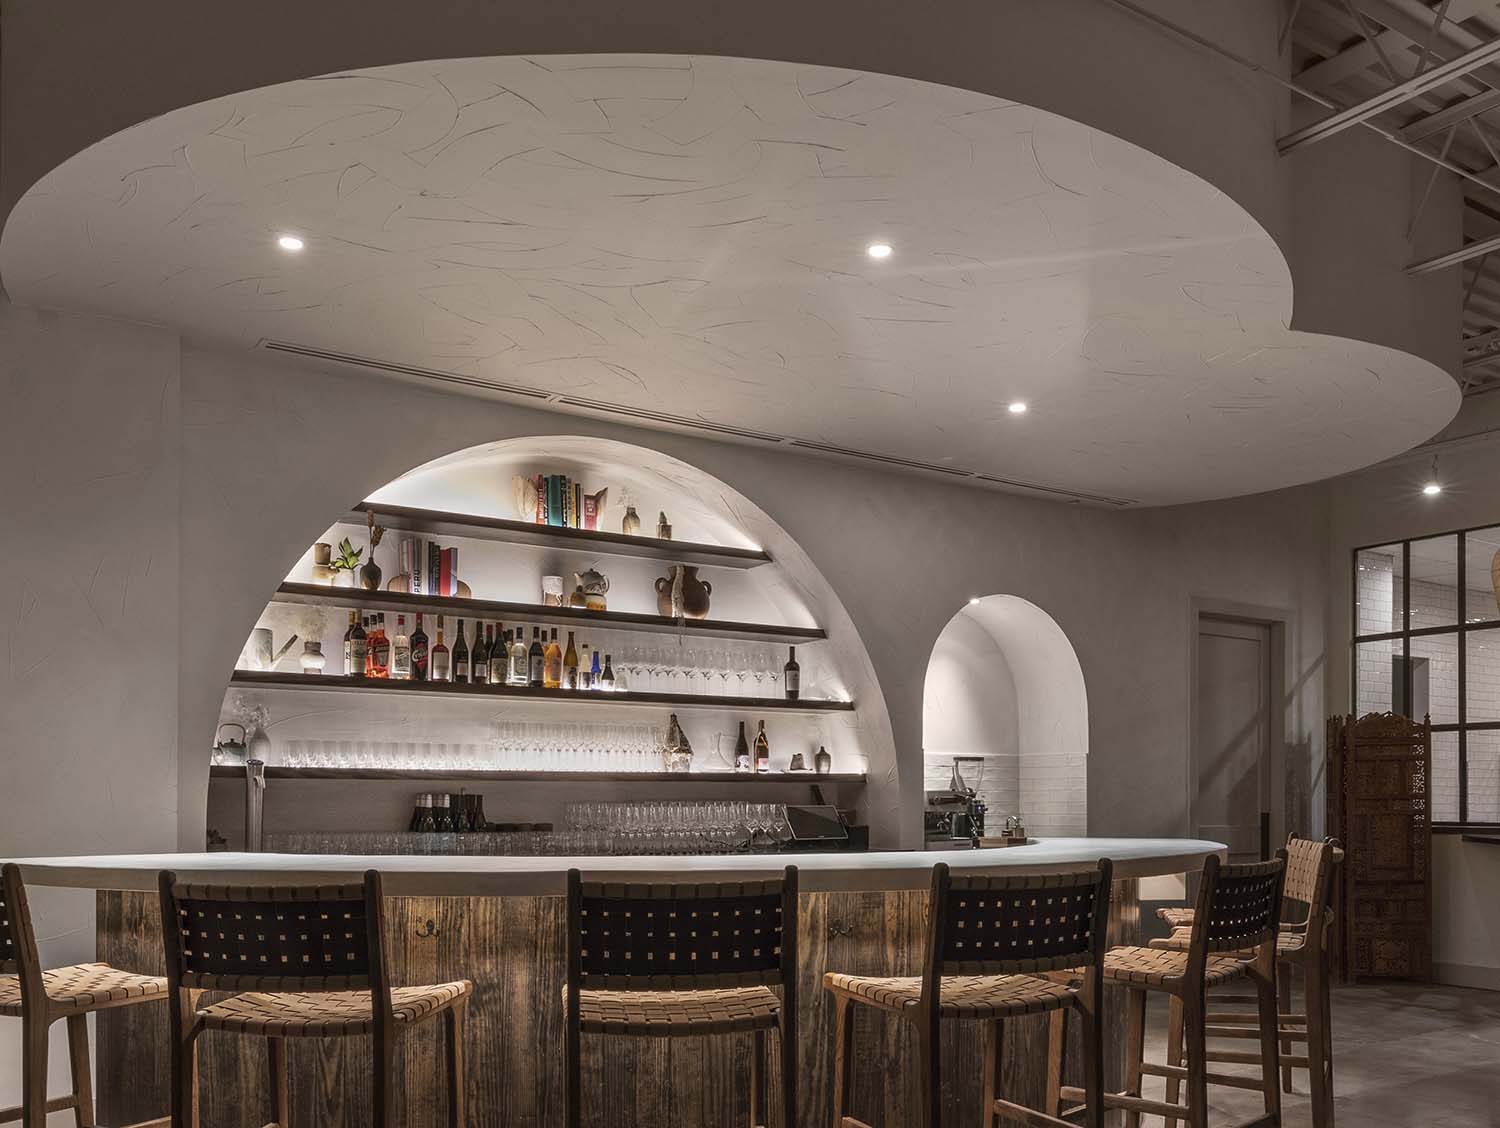 Jūn Houston, Jun by Kin The Heights Restaurant by Evelyn Garcia and Henry Lu